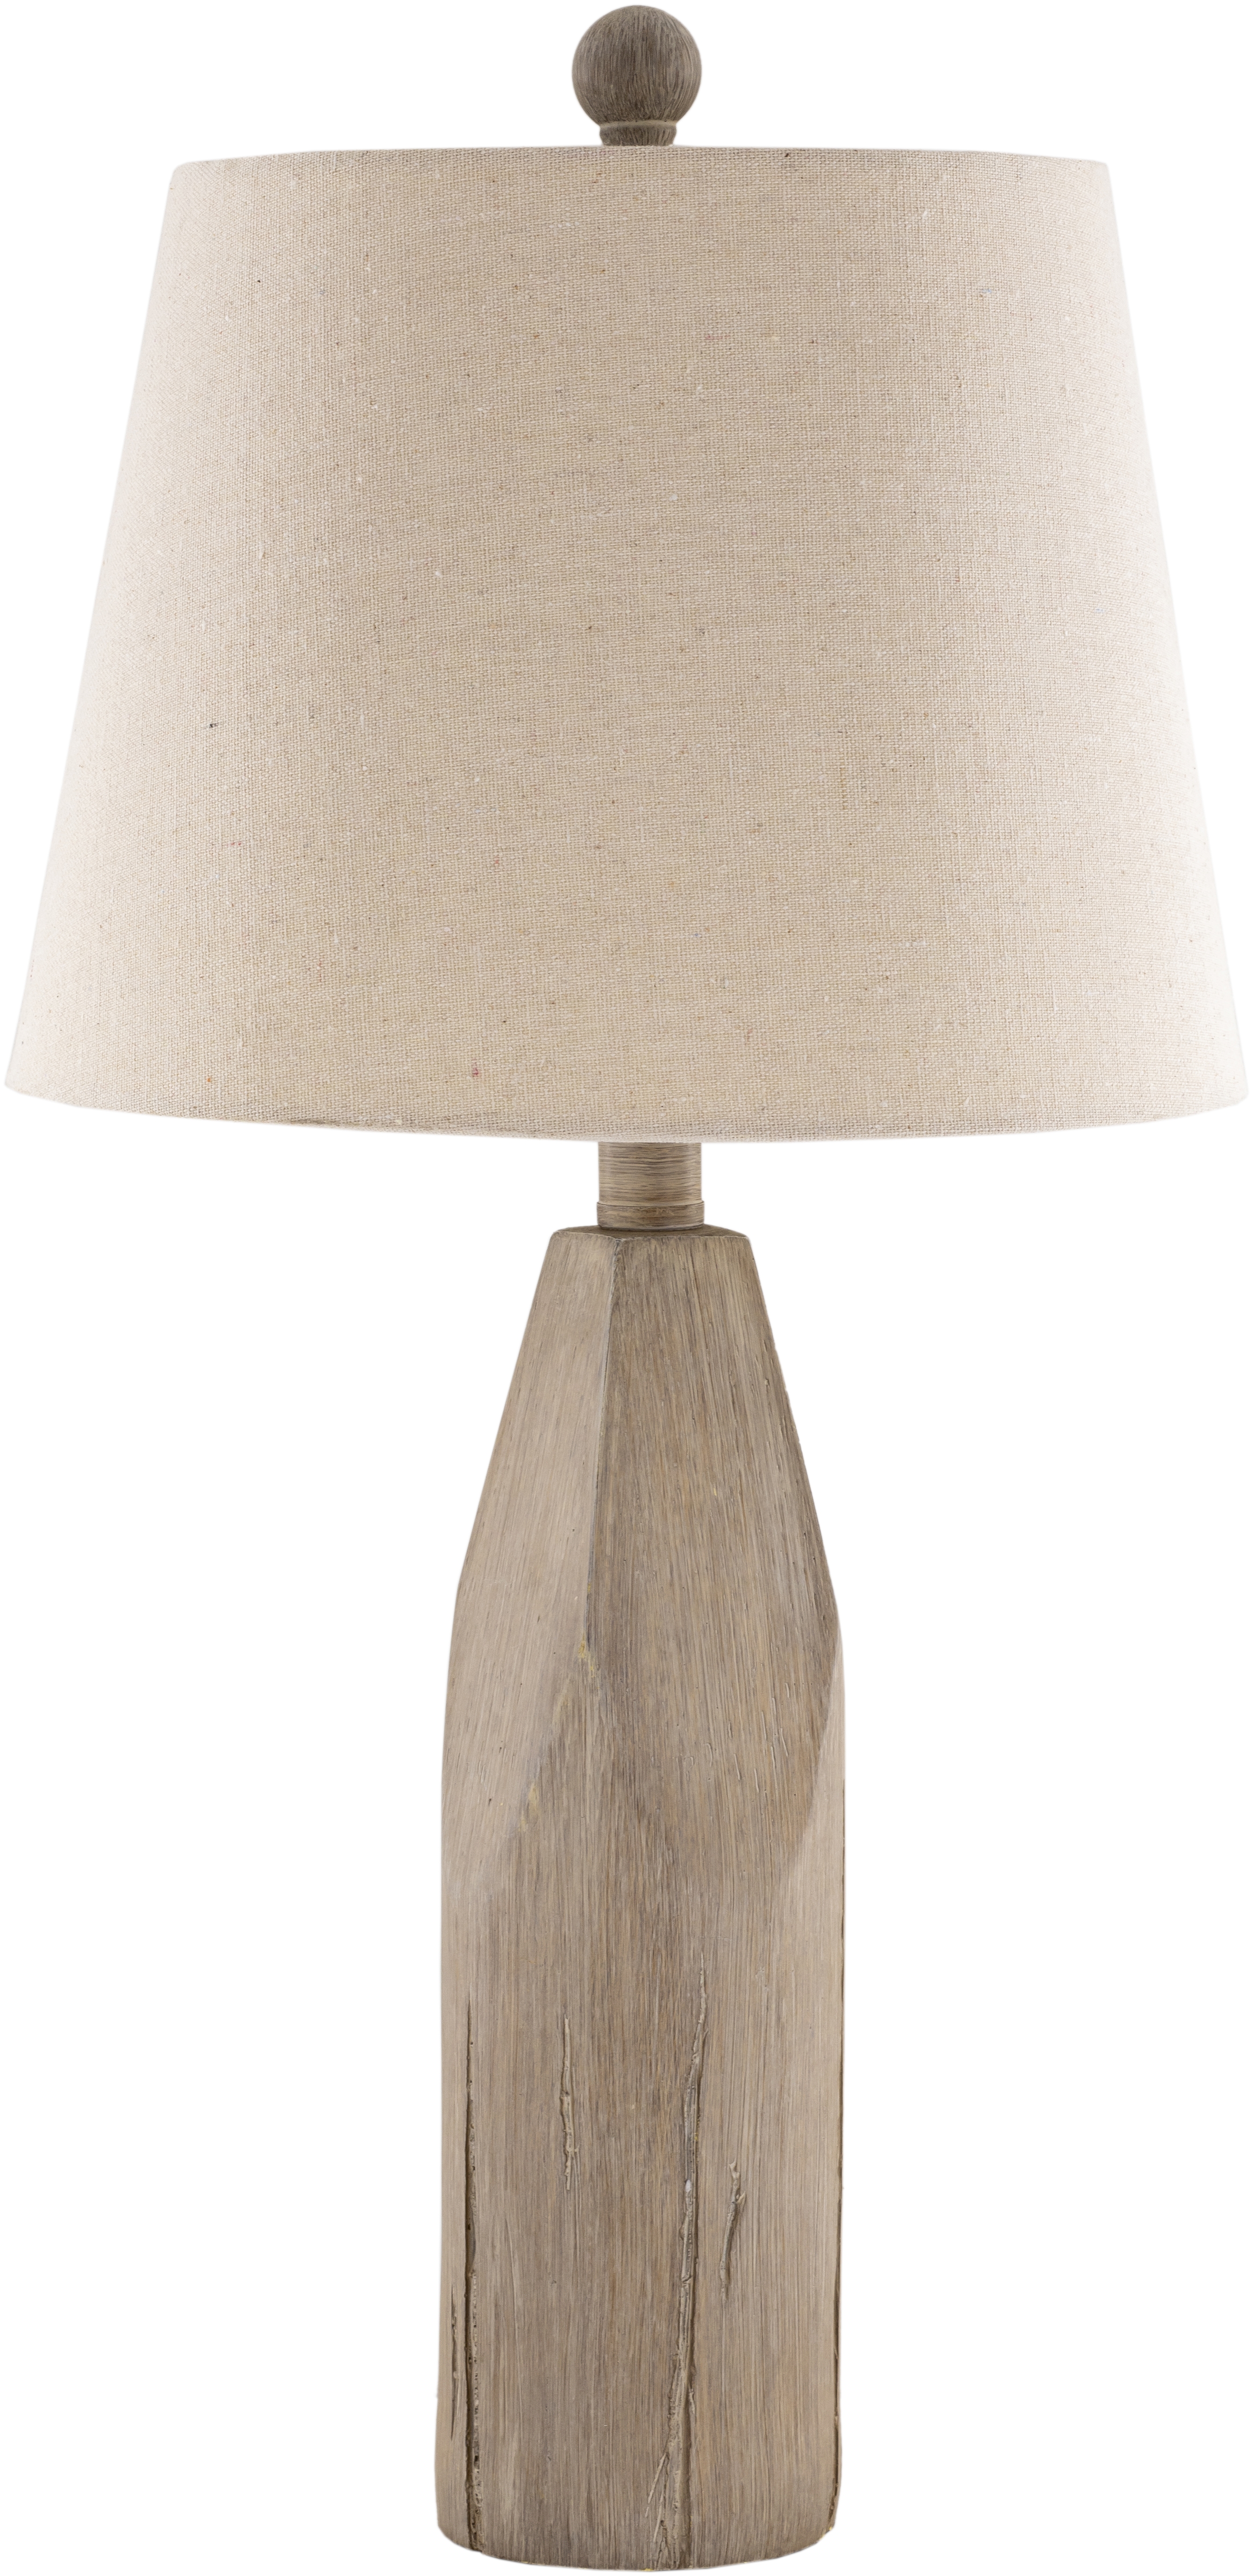 Fremont Table Lamp - Image 1